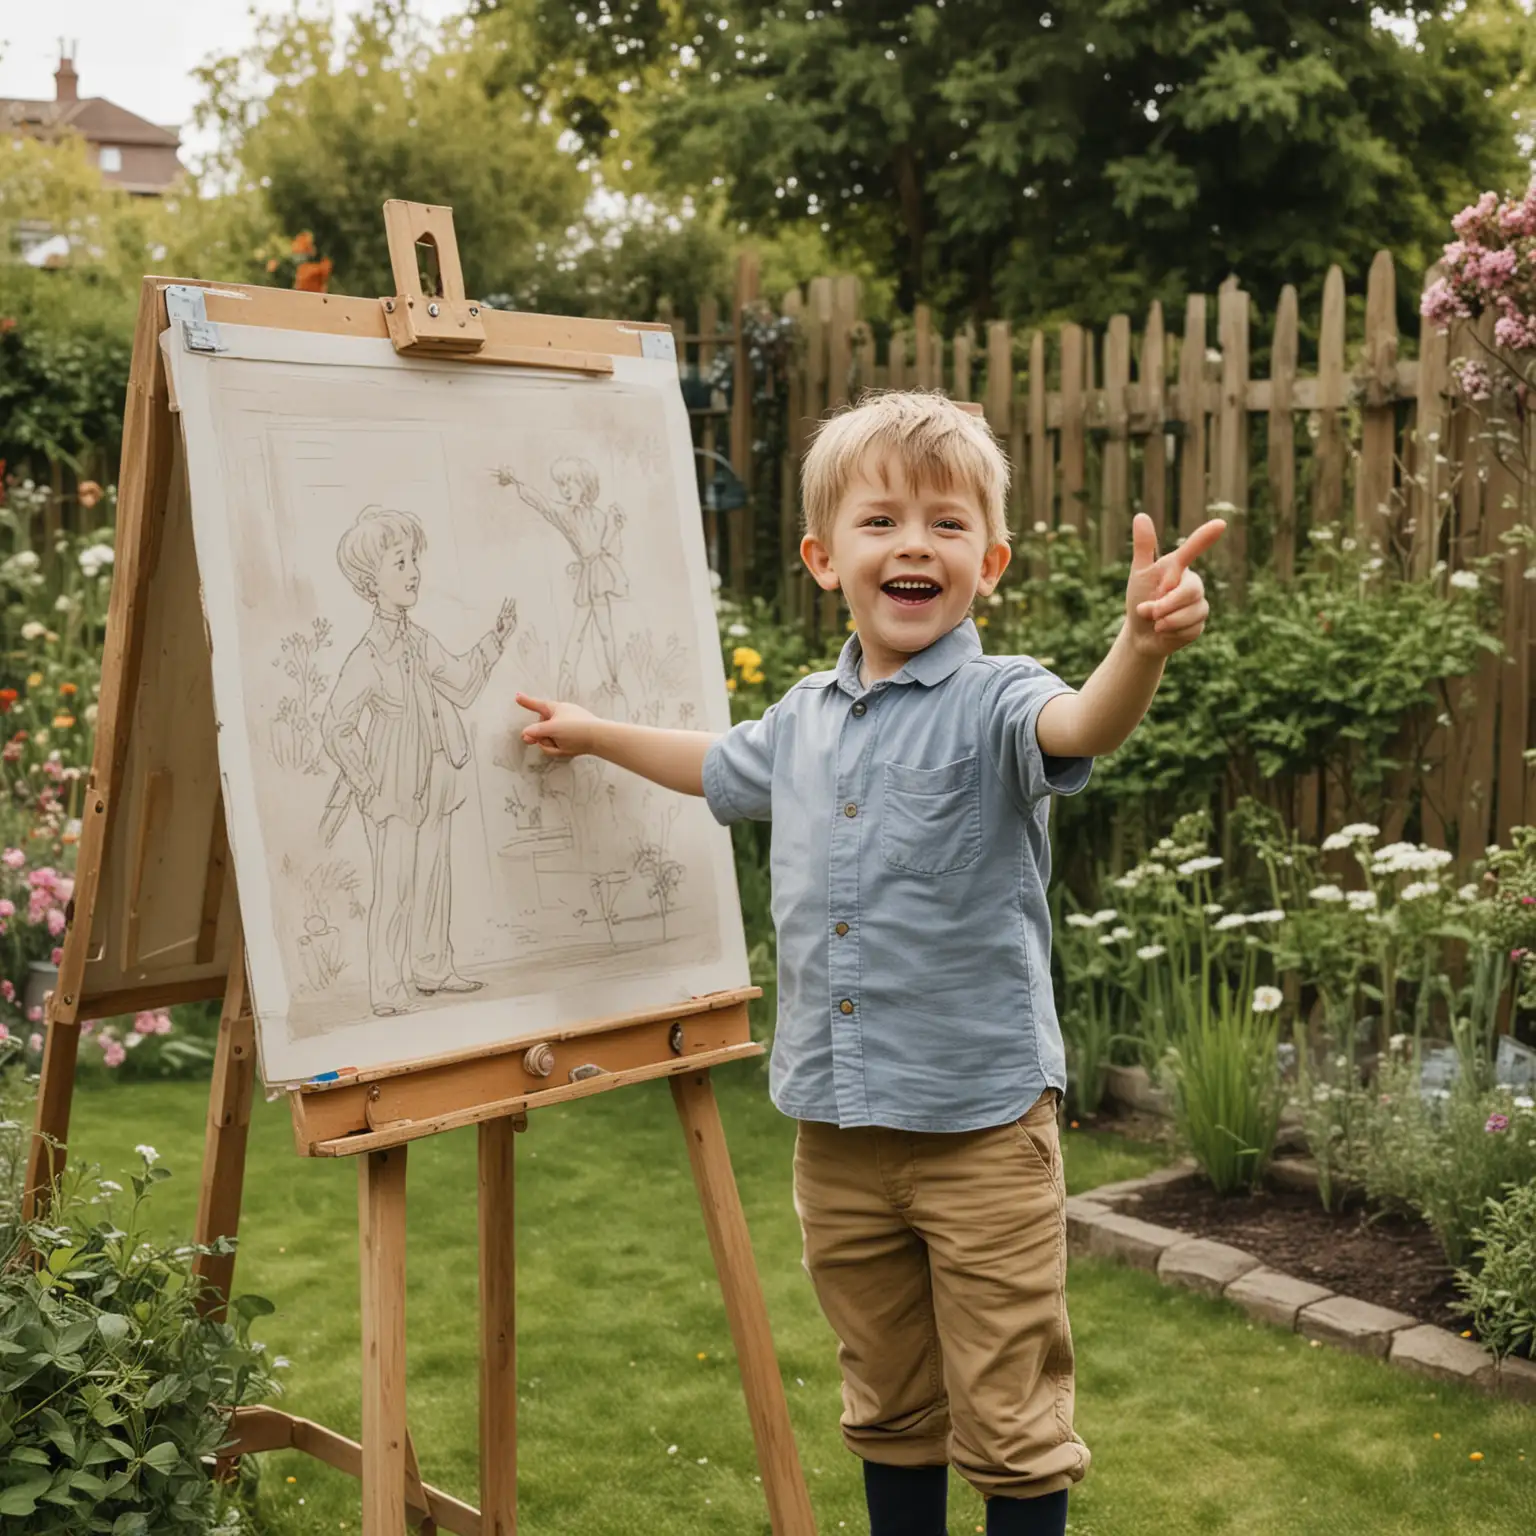 Excited Young Boy Pointing to Poster in Garden